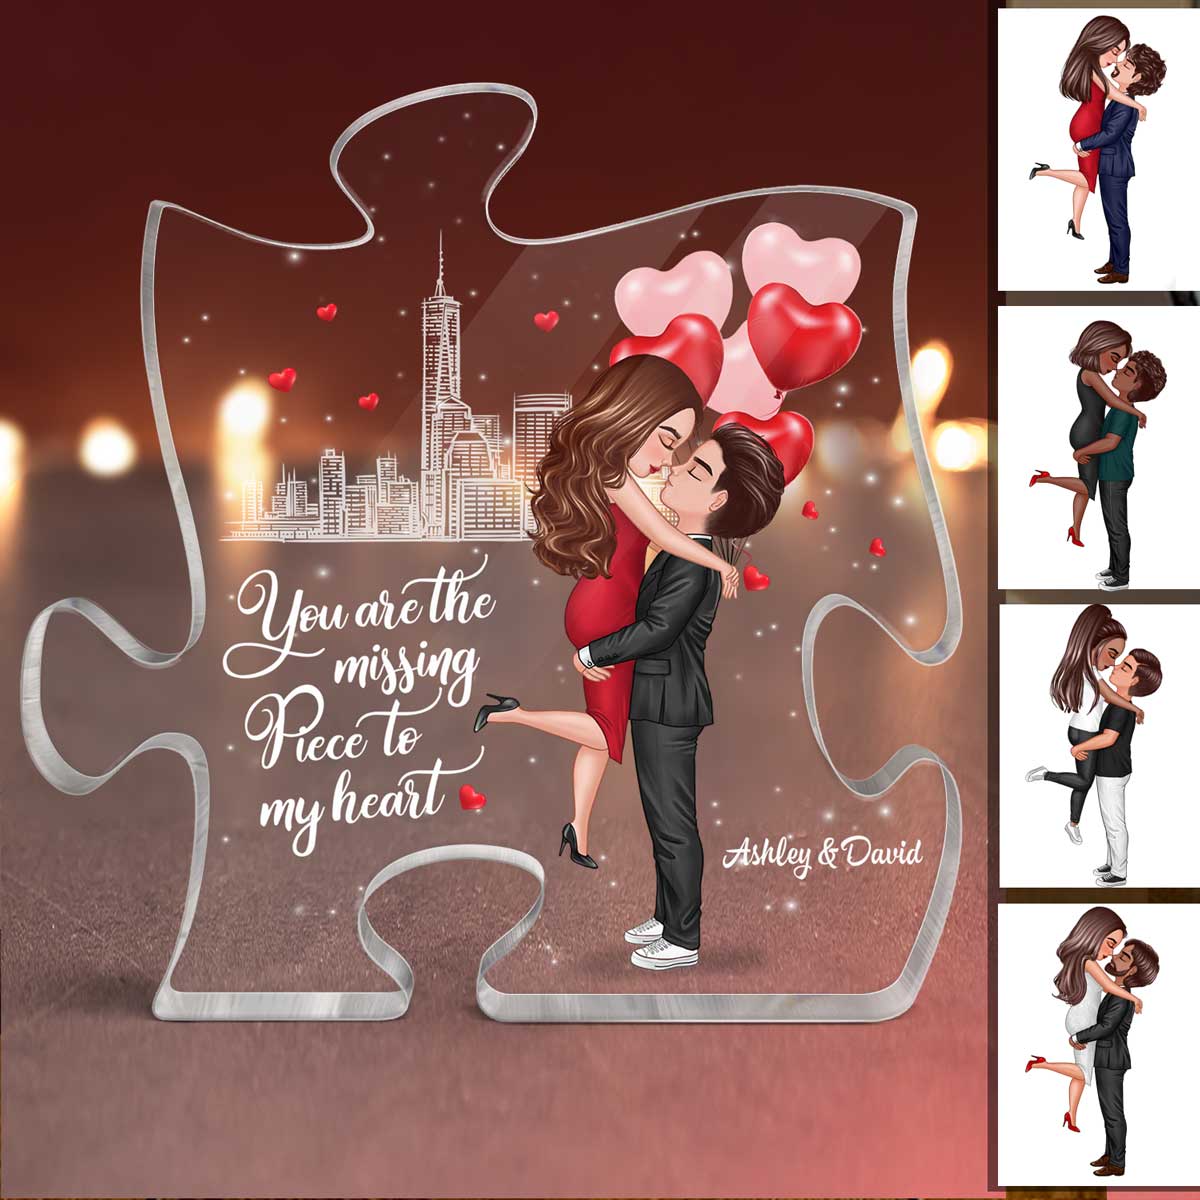 You Will Always Be Our Missing Piece - Personalized Puzzle Piece Acrylic  Plaque